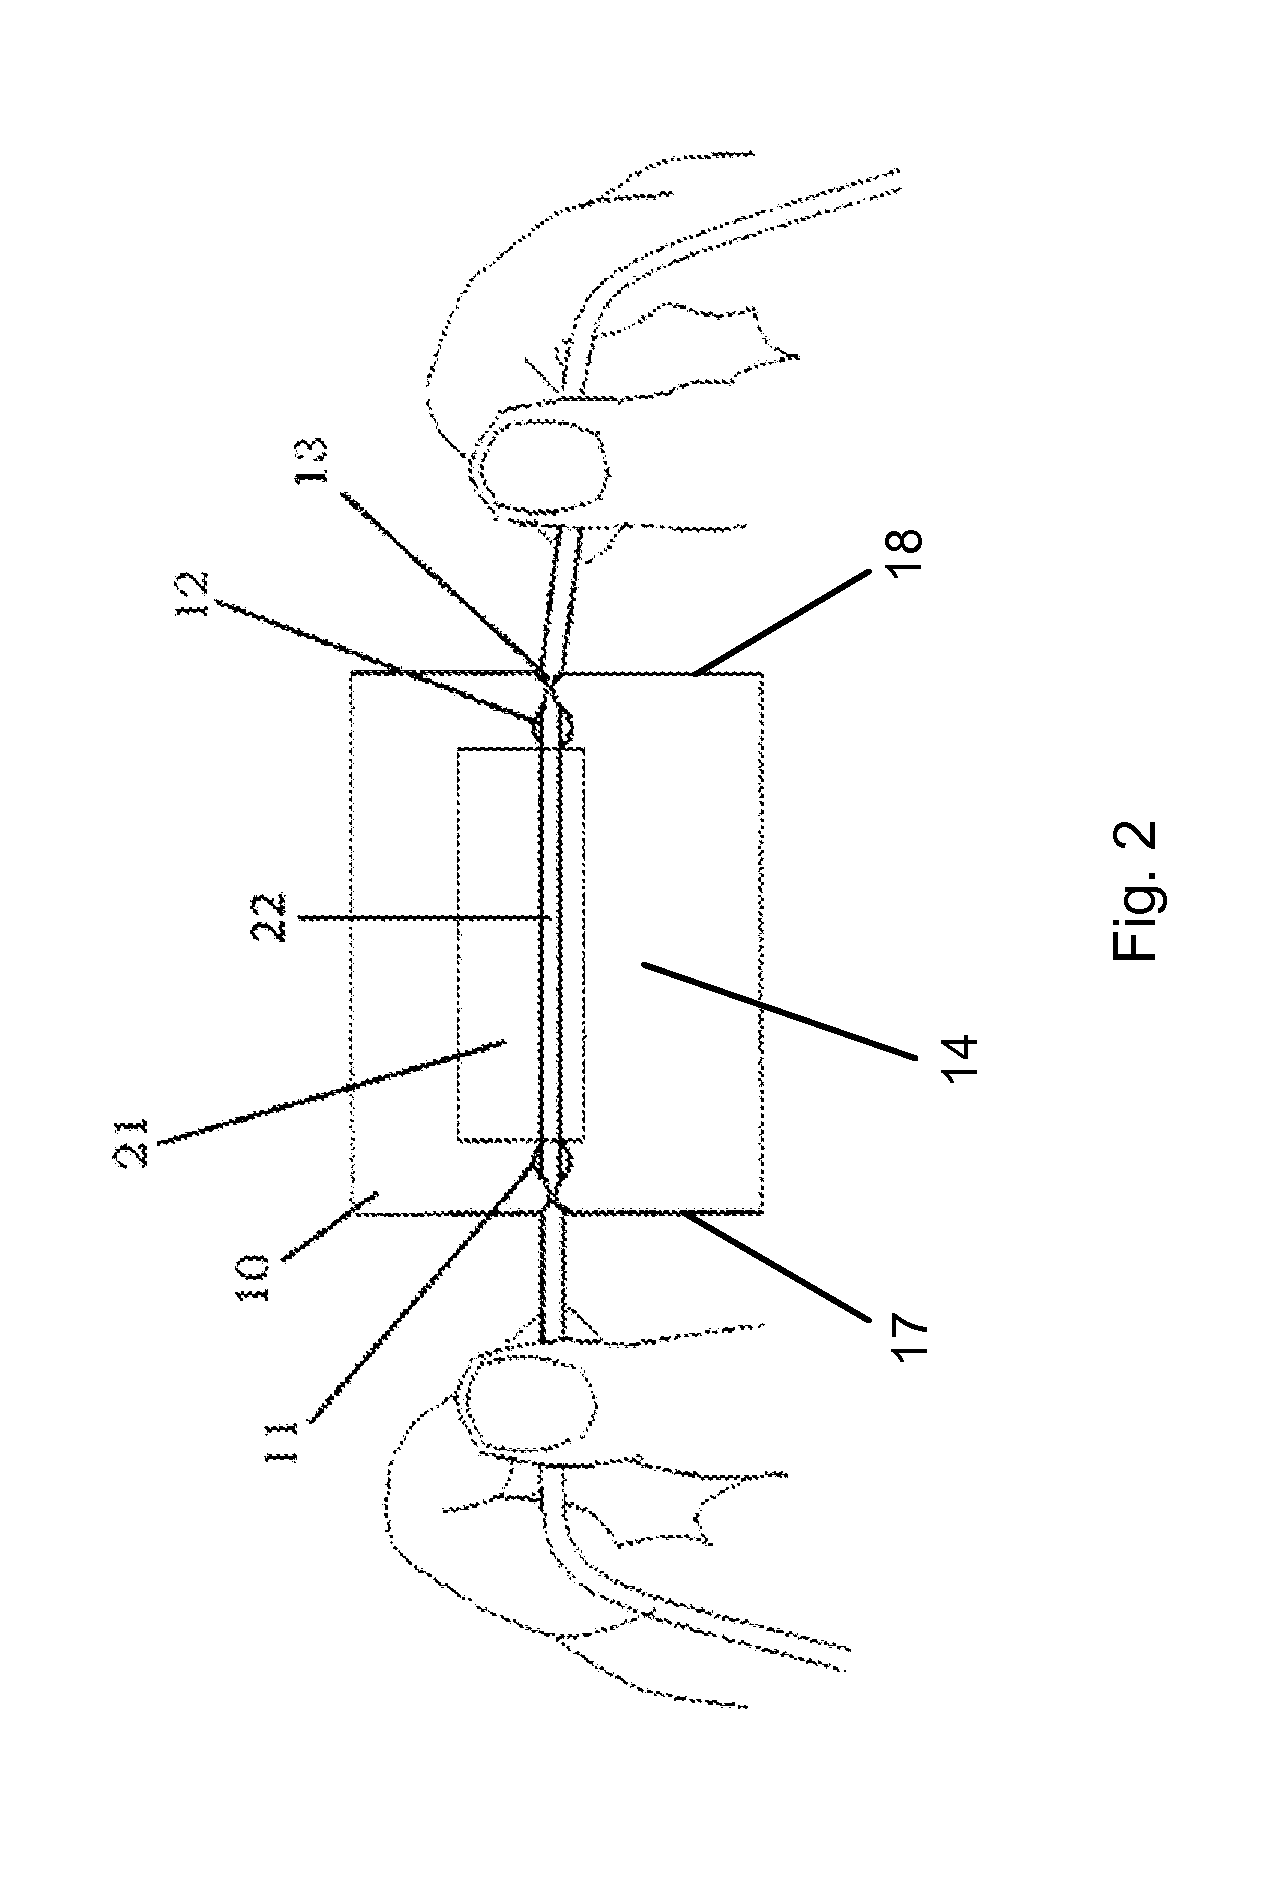 Multiple intravenous line organizer and method for using thereof